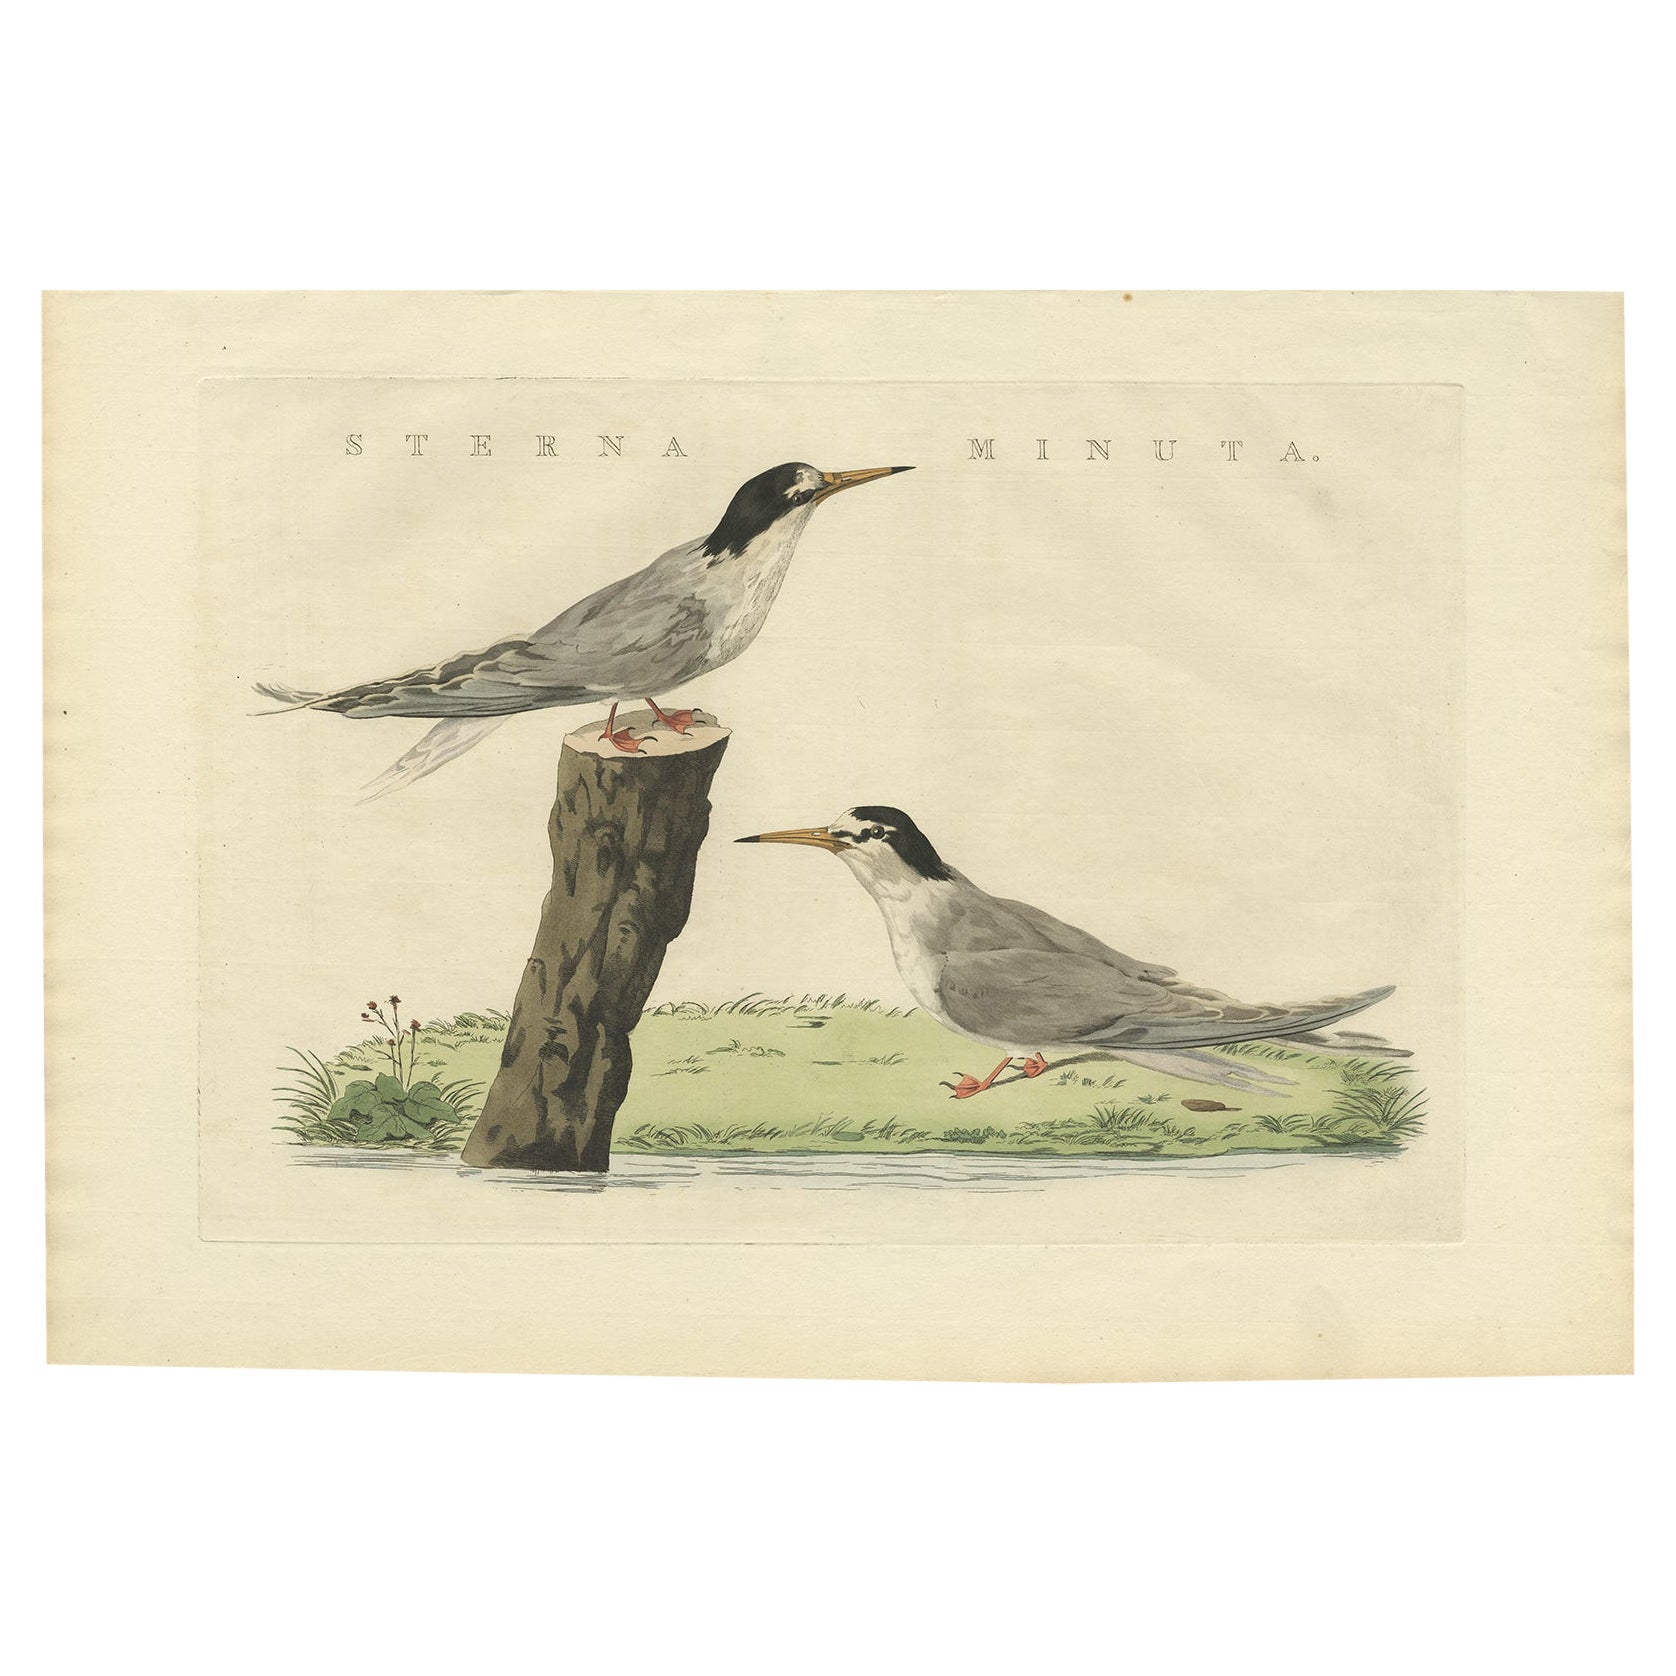 Antique Hand-Coloured Bird Print of the Little Tern by Sepp & Nozeman, 1829 For Sale